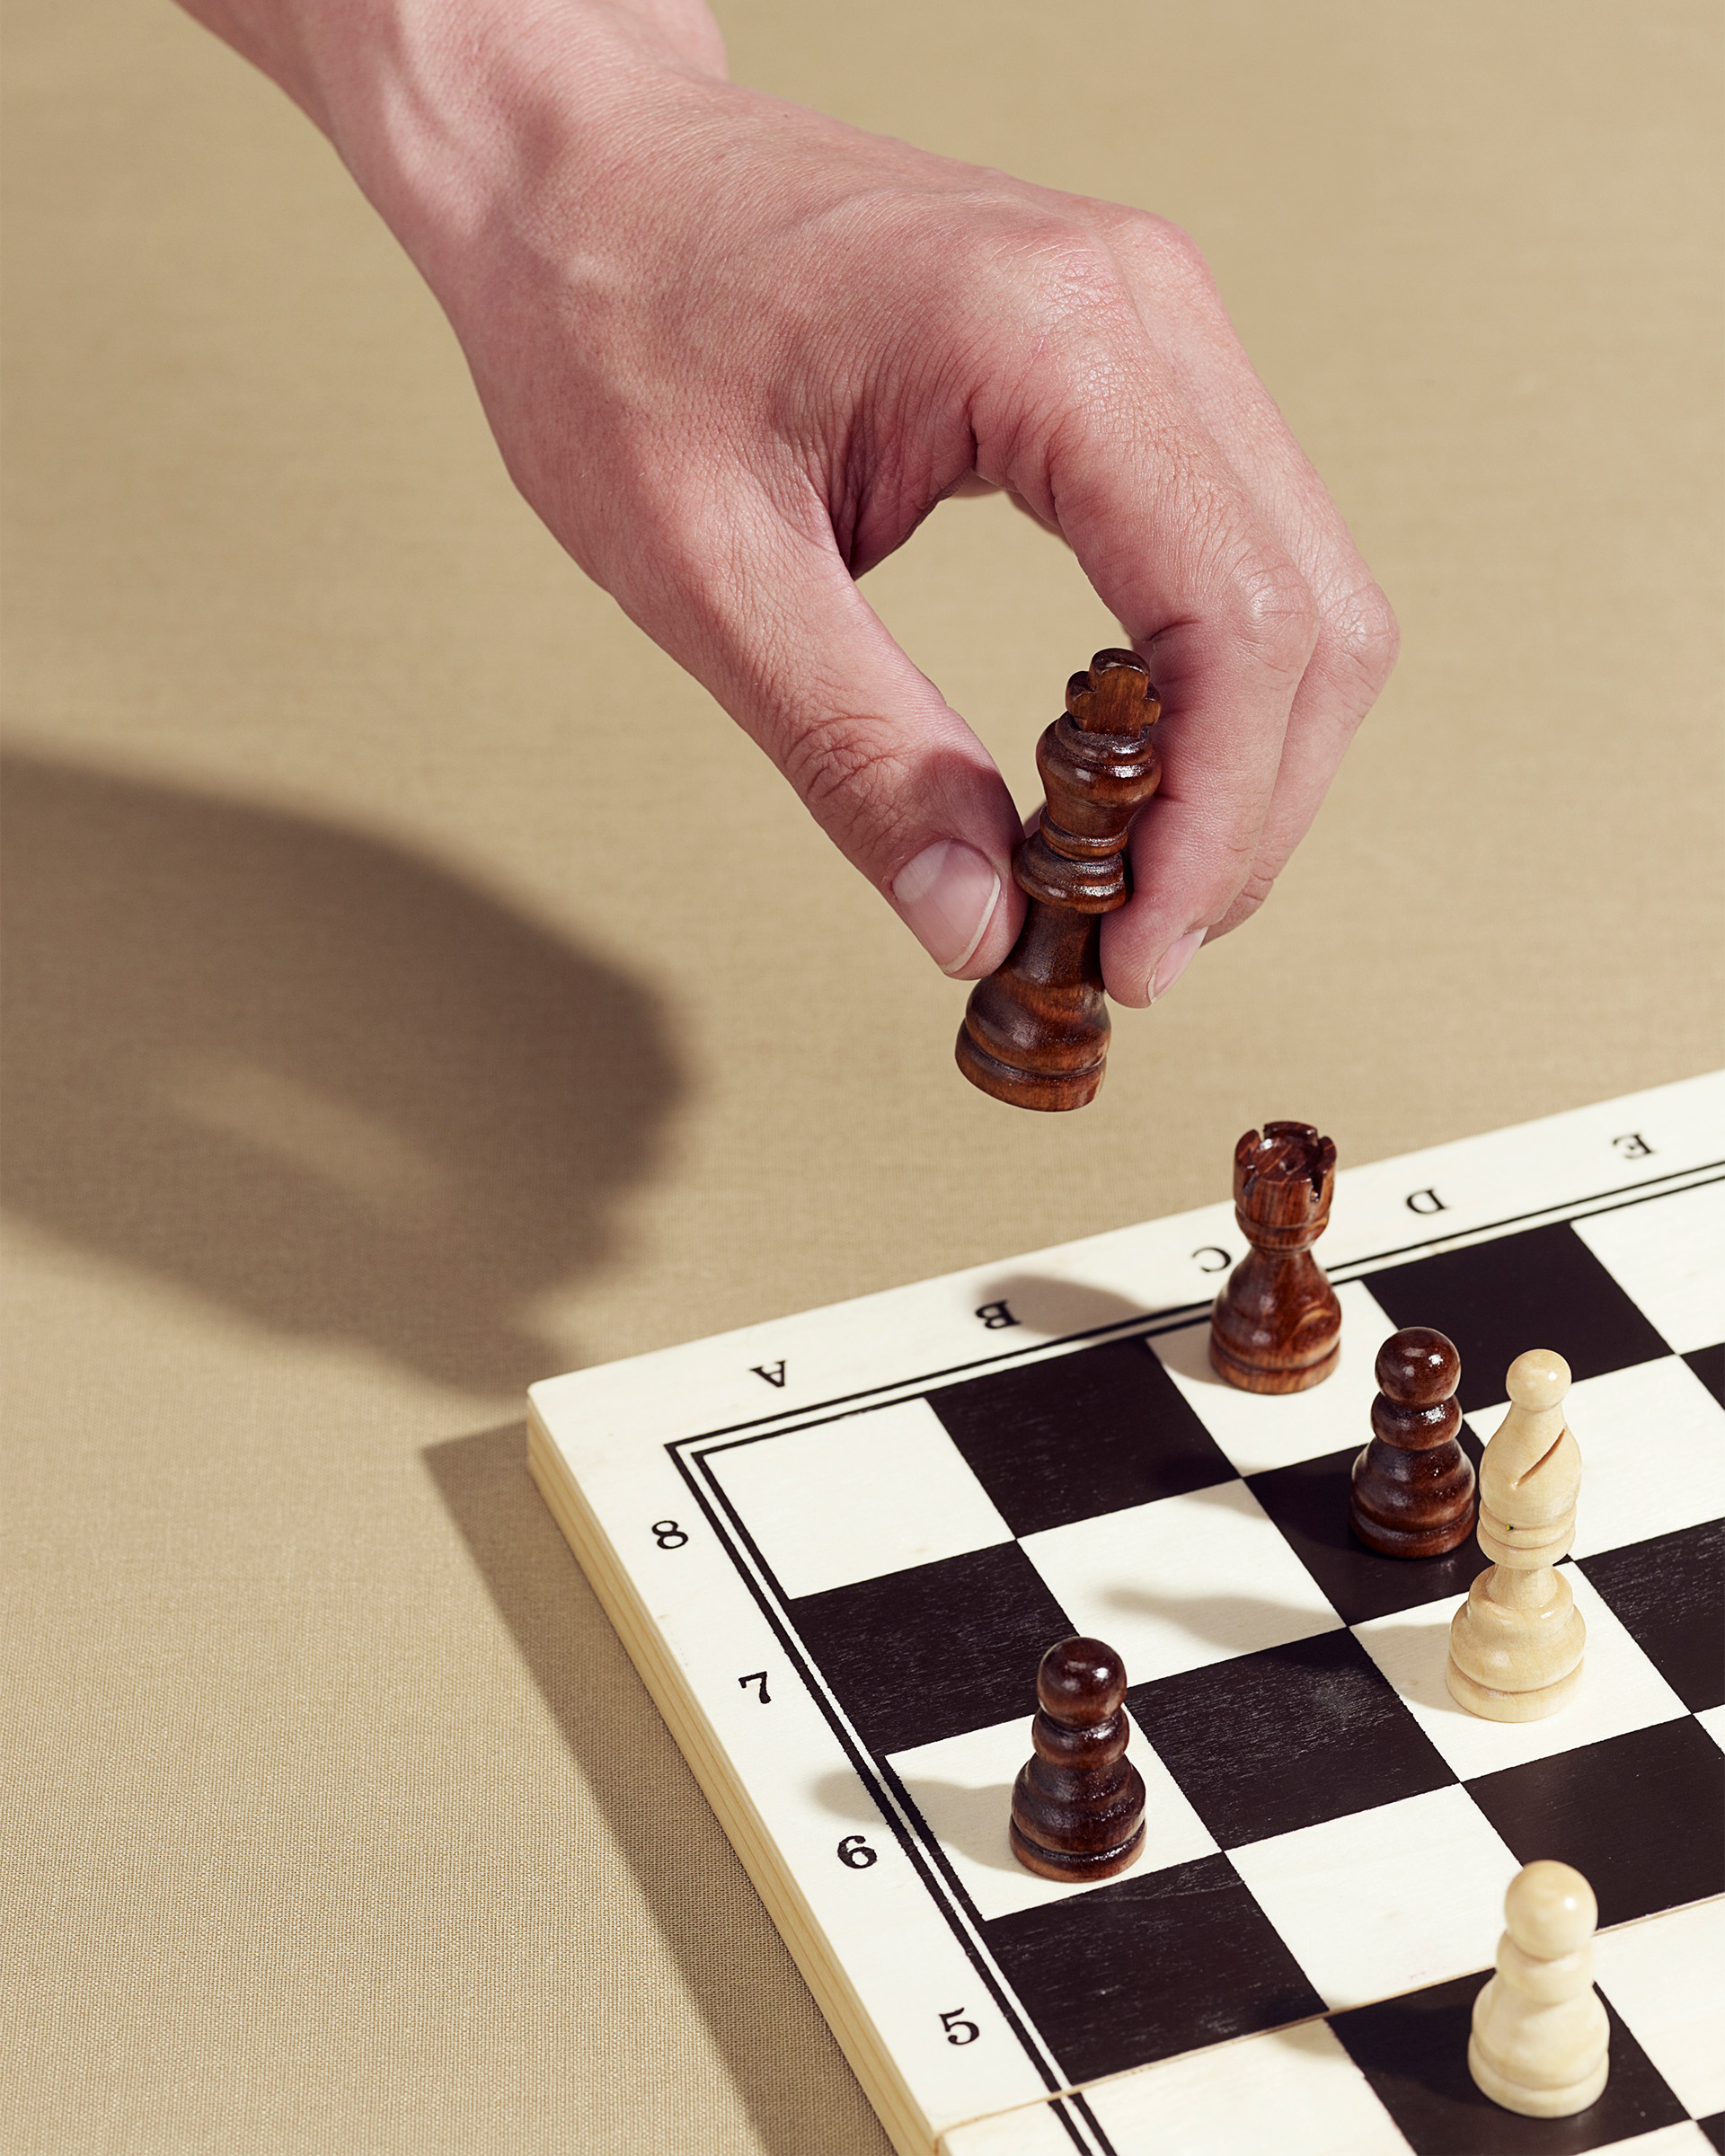 Chess.com is an online gaming platform. (Getty Images)